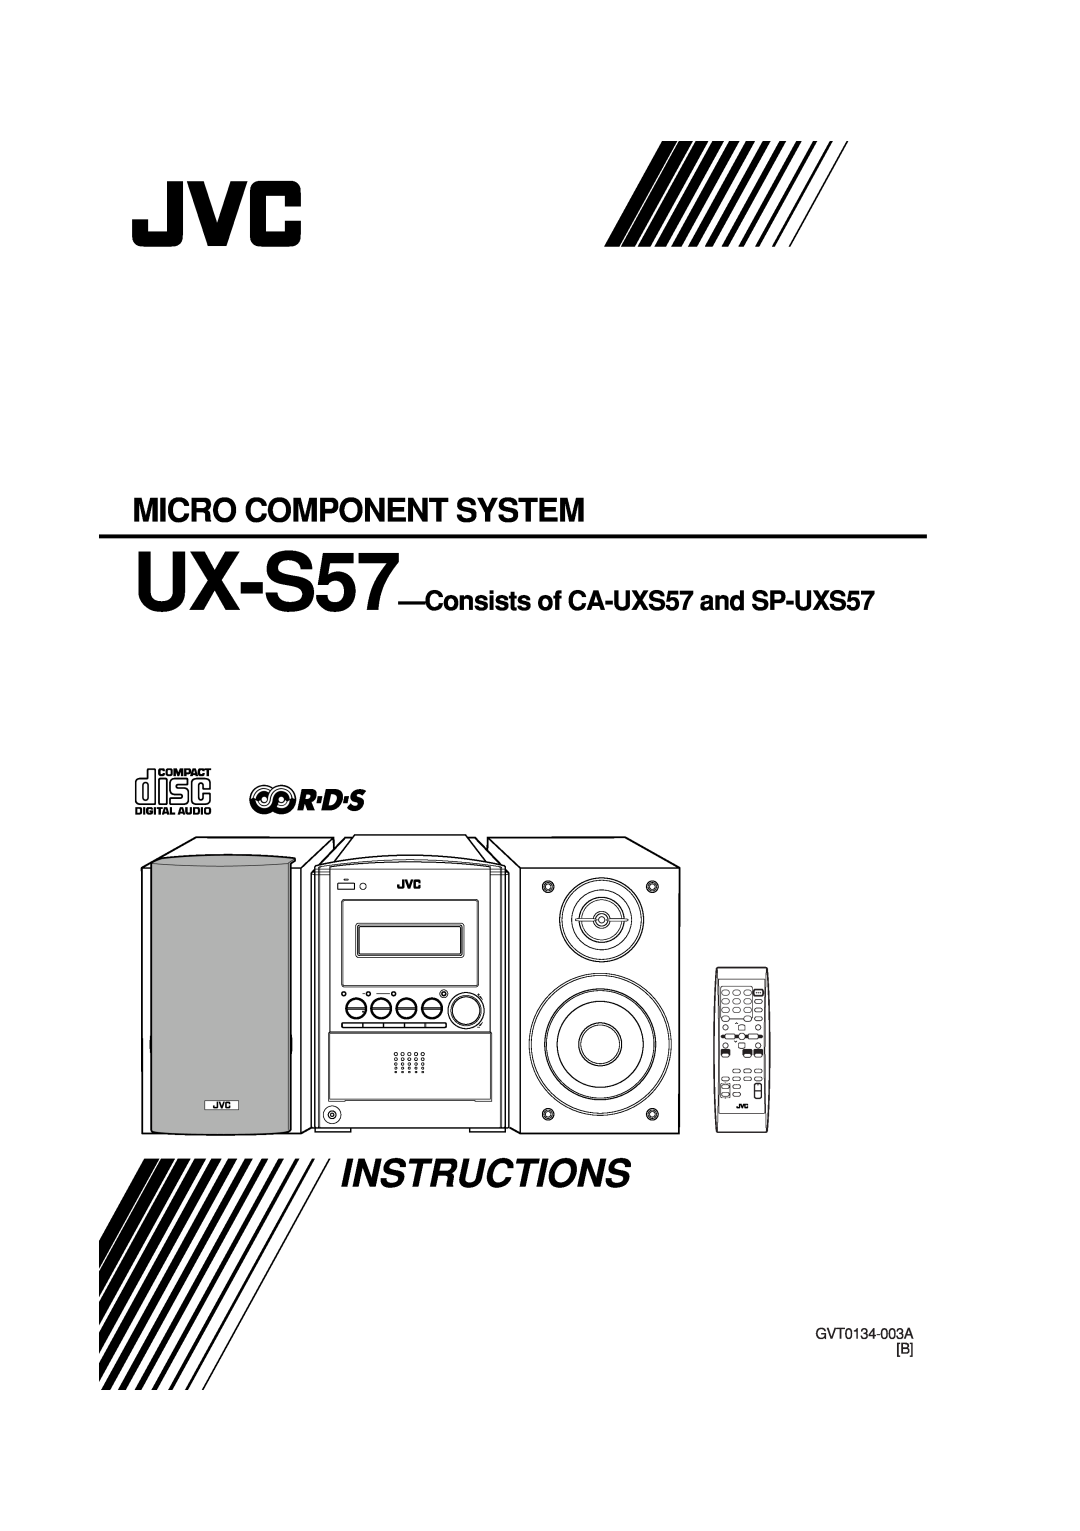 JVC manual Instructions, Micro Component System, UX-S57-Consistsof CA-UXS57and SP-UXS57, GVT0134-003AB, 5-CD, Ahb Pro 